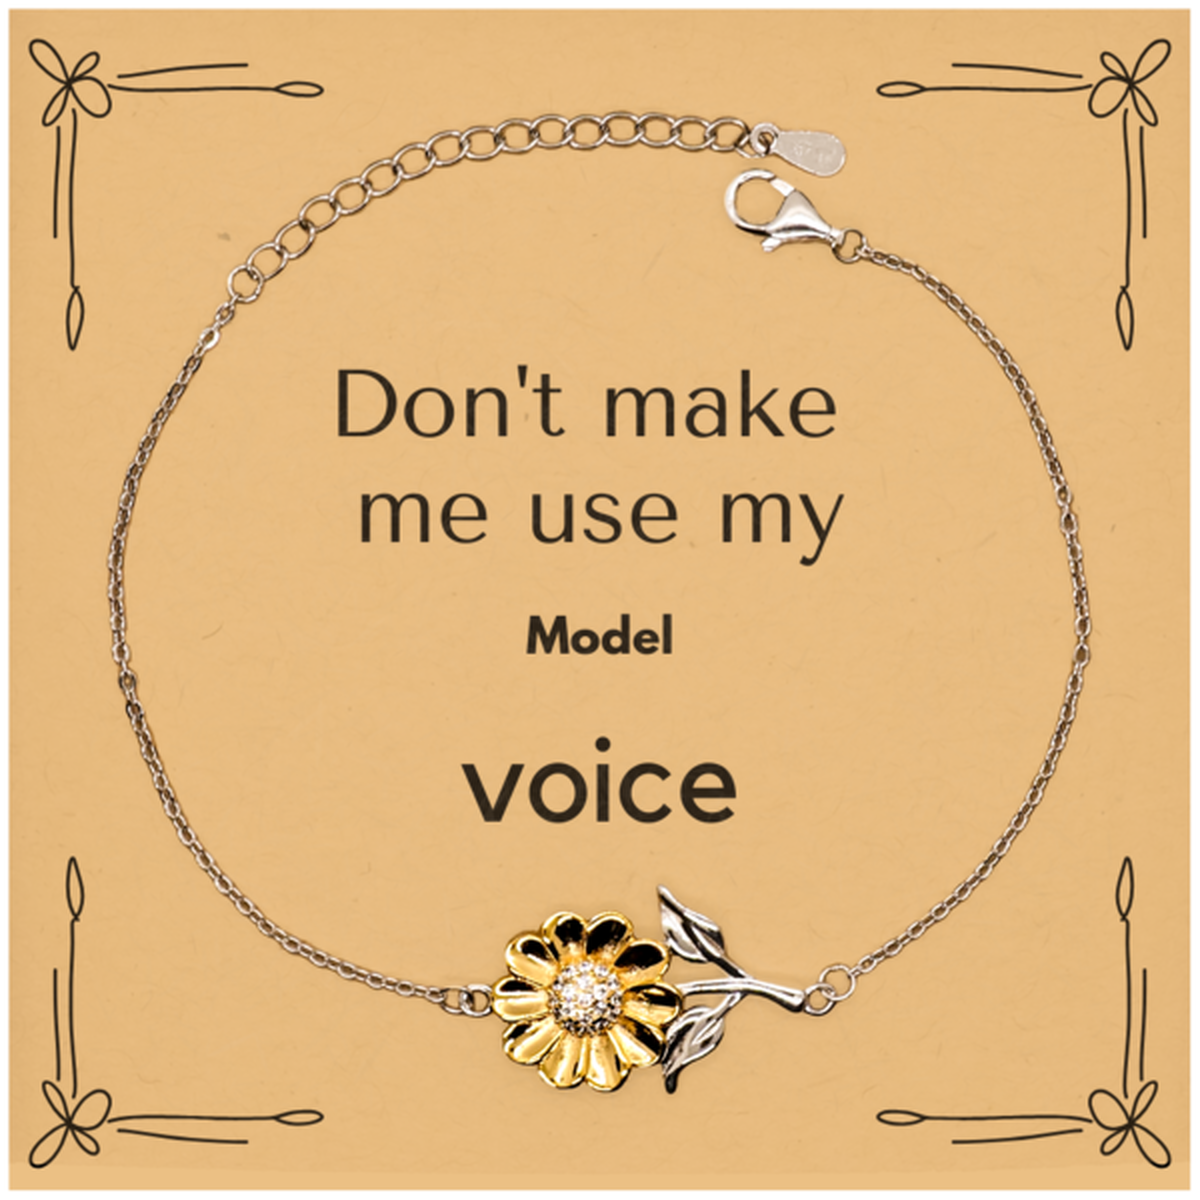 Don't make me use my Model voice, Sarcasm Model Card Gifts, Christmas Model Sunflower Bracelet Birthday Unique Gifts For Model Coworkers, Men, Women, Colleague, Friends